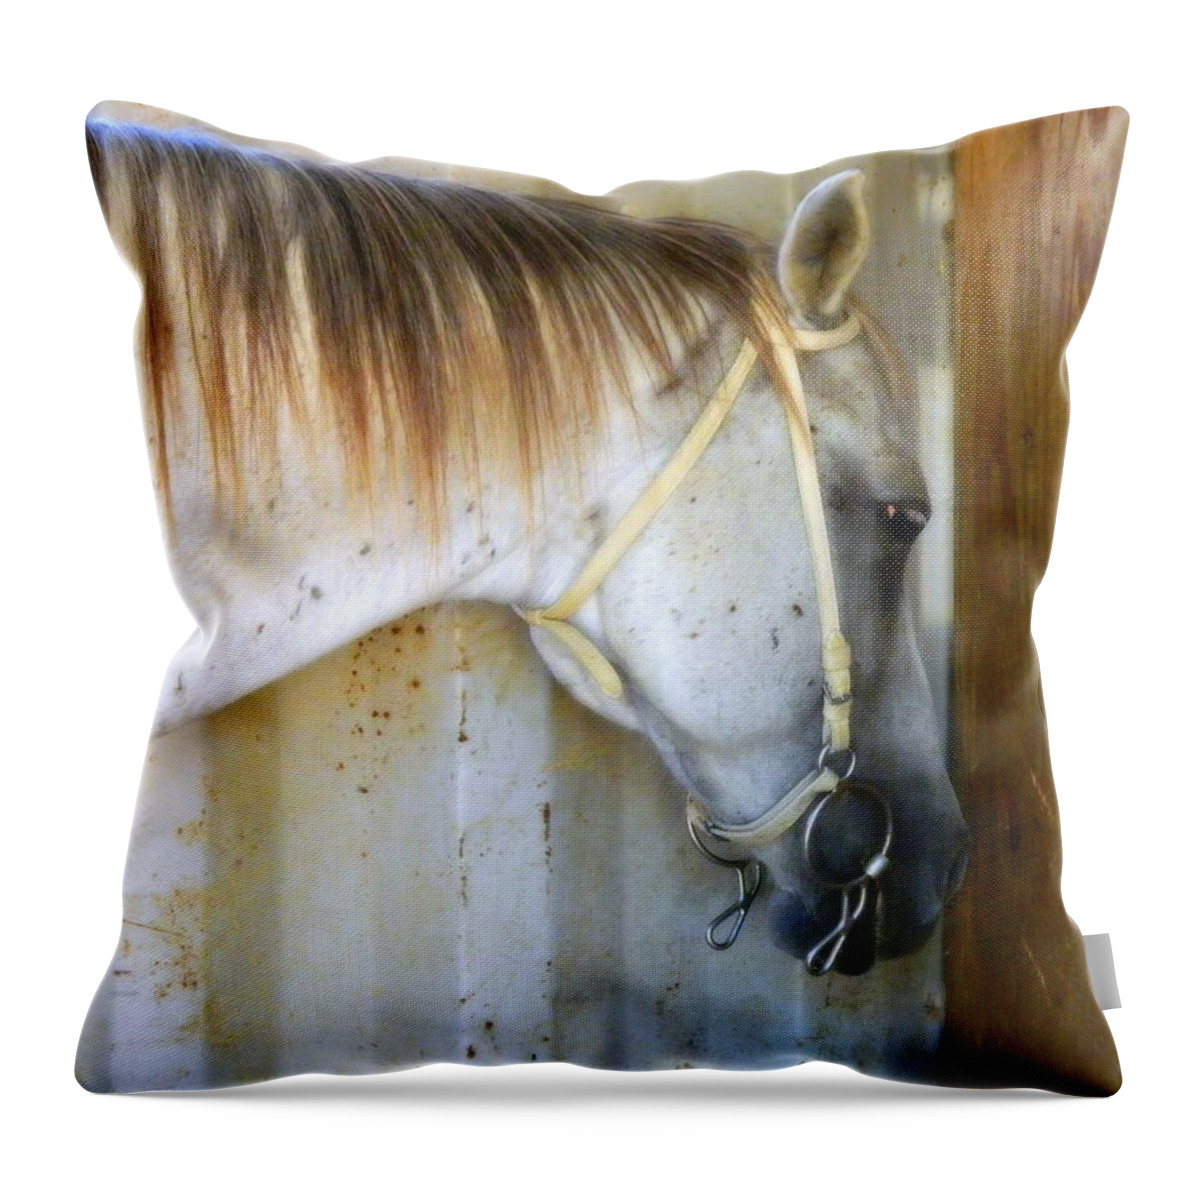 Horse Throw Pillow featuring the photograph Saddle Break by Kathy Barney